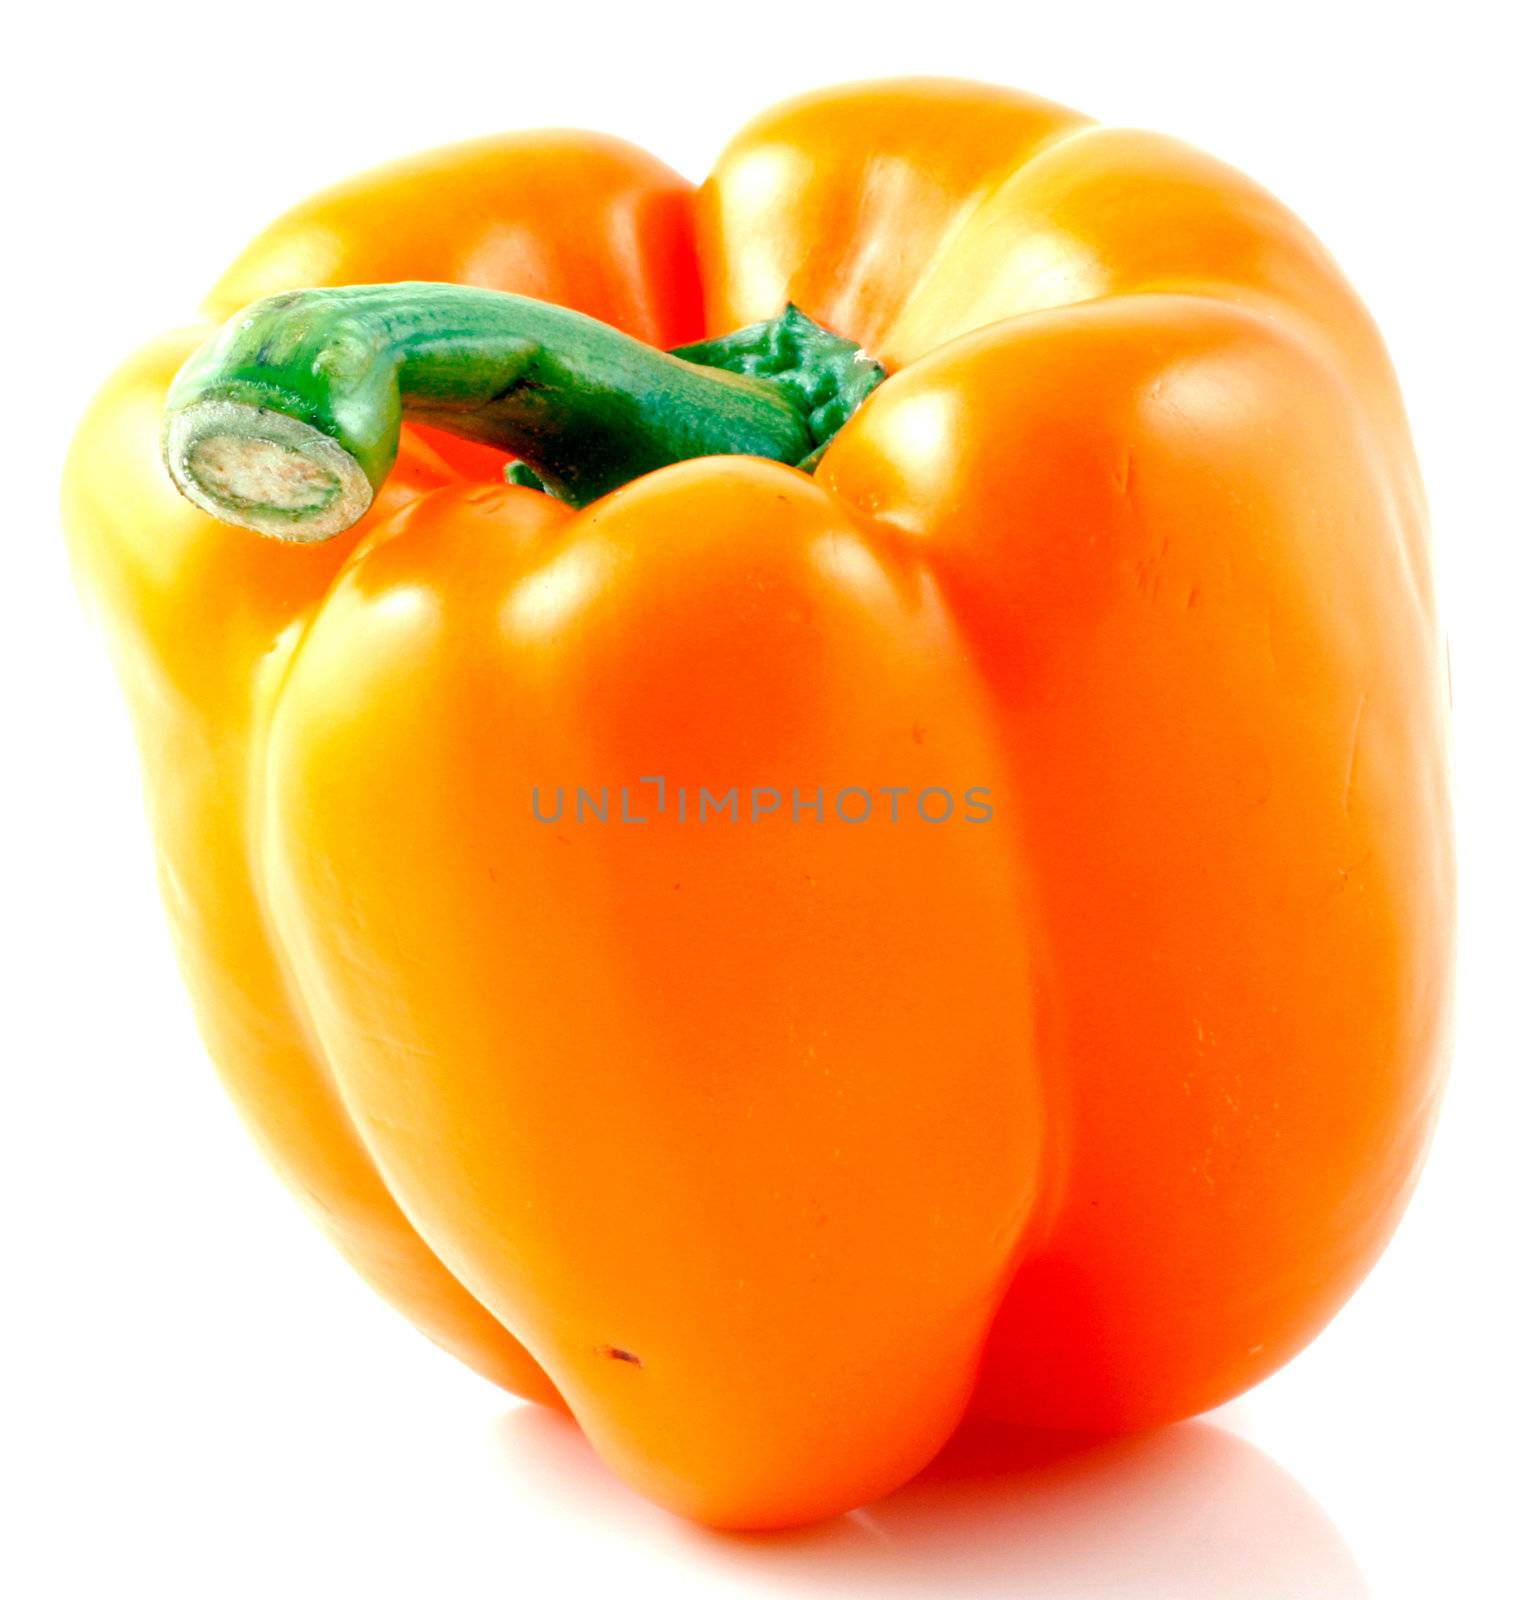 Peppers on white background